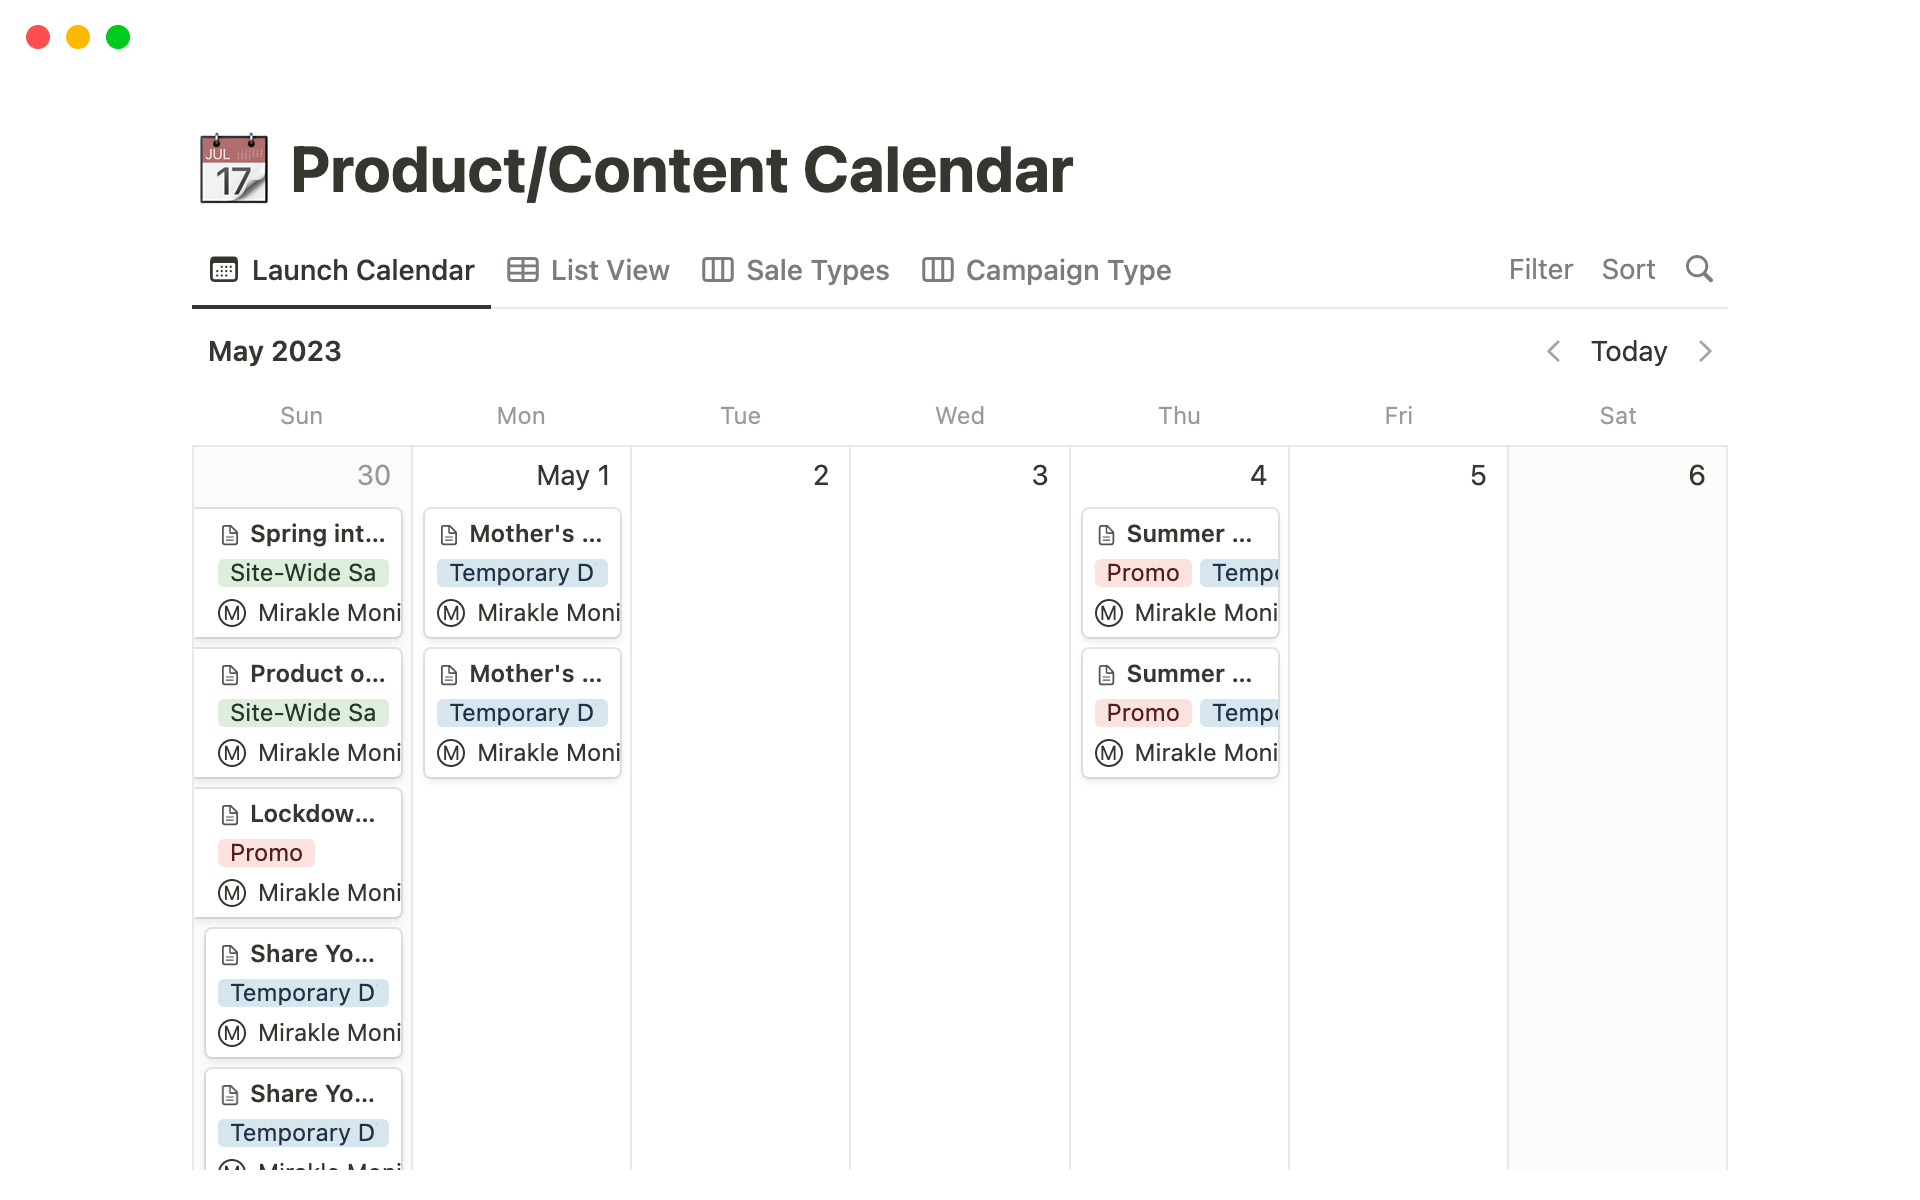 Email/SMS Product Content Calendarのテンプレートのプレビュー